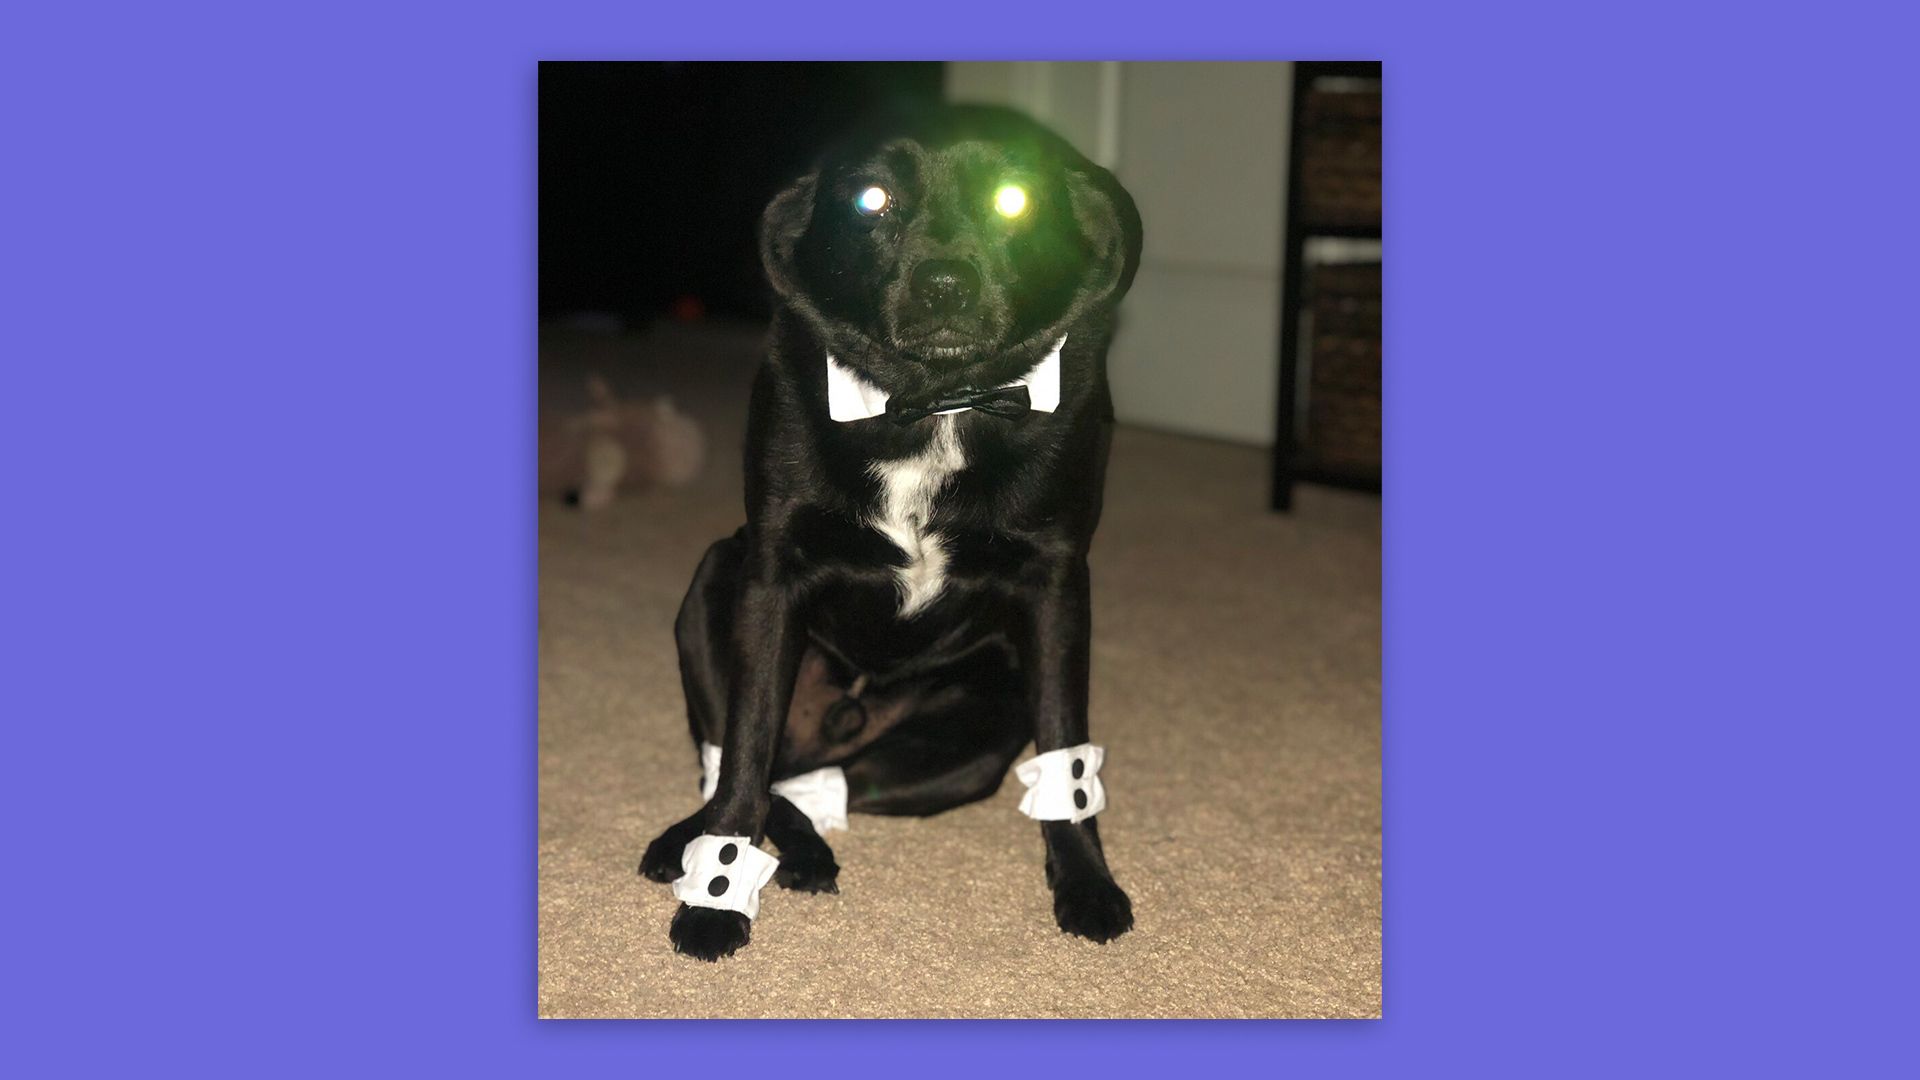 A dog dressed in a tuxedo-style bow tie and paw cuffs.